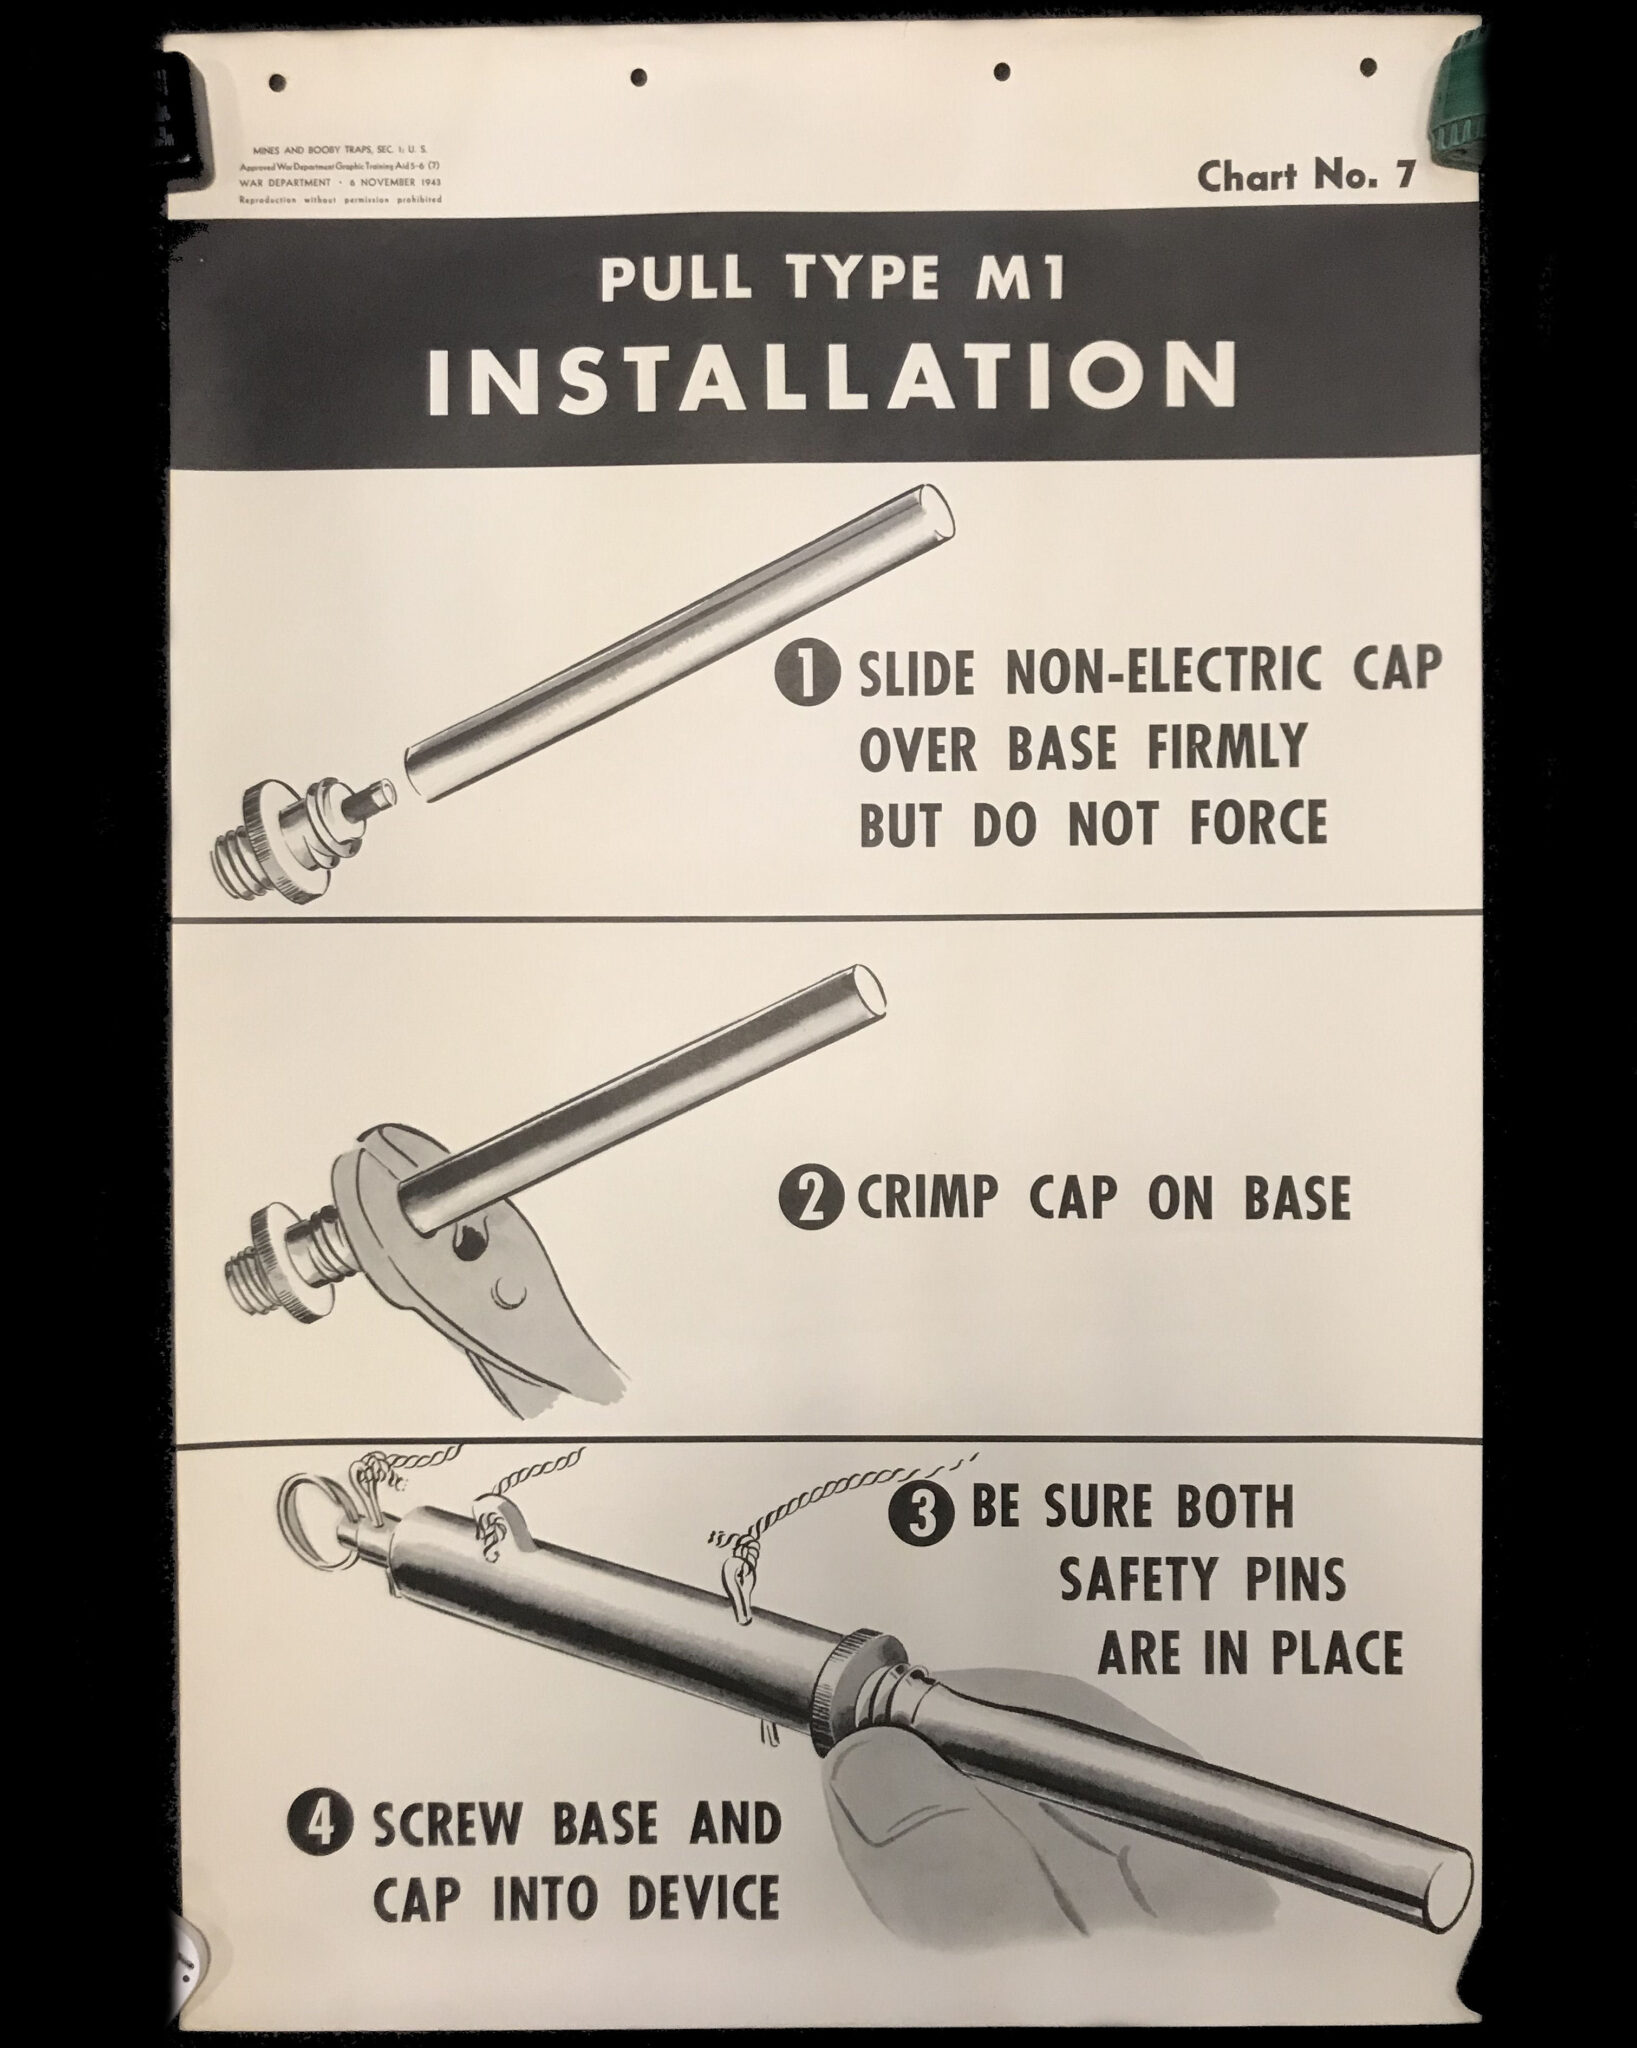 https://mg592.upcloudobjects.com/site/2023/05/WWII-USA-Mines-and-Booby-Traps-Training-aid-poster-Pull-Type-M1-Installation.jpg